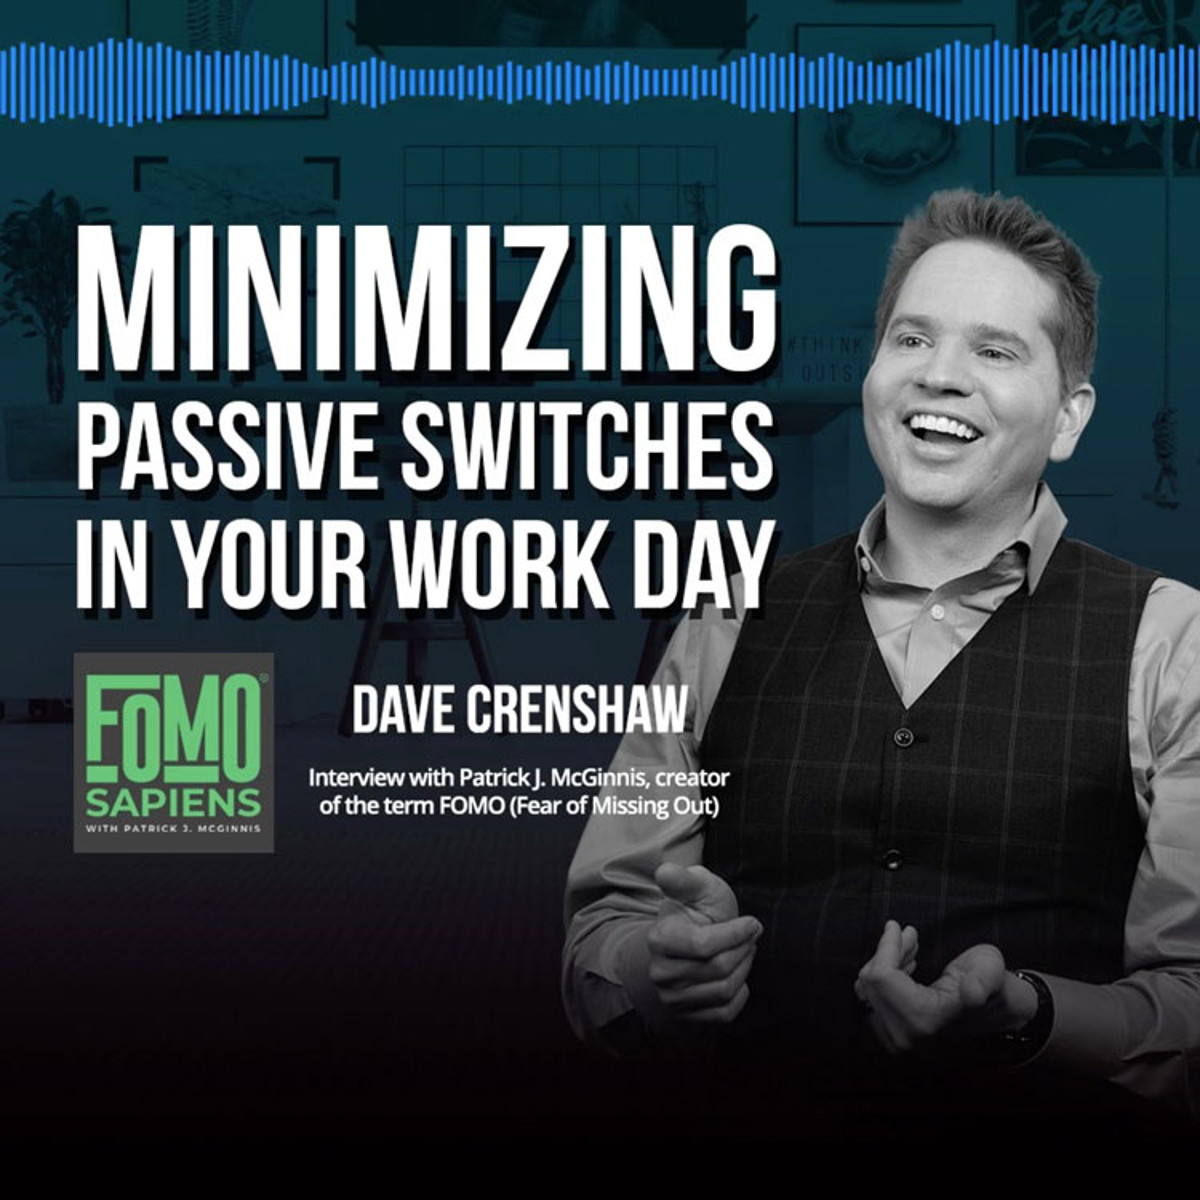 How to minimize passive switches in your work day